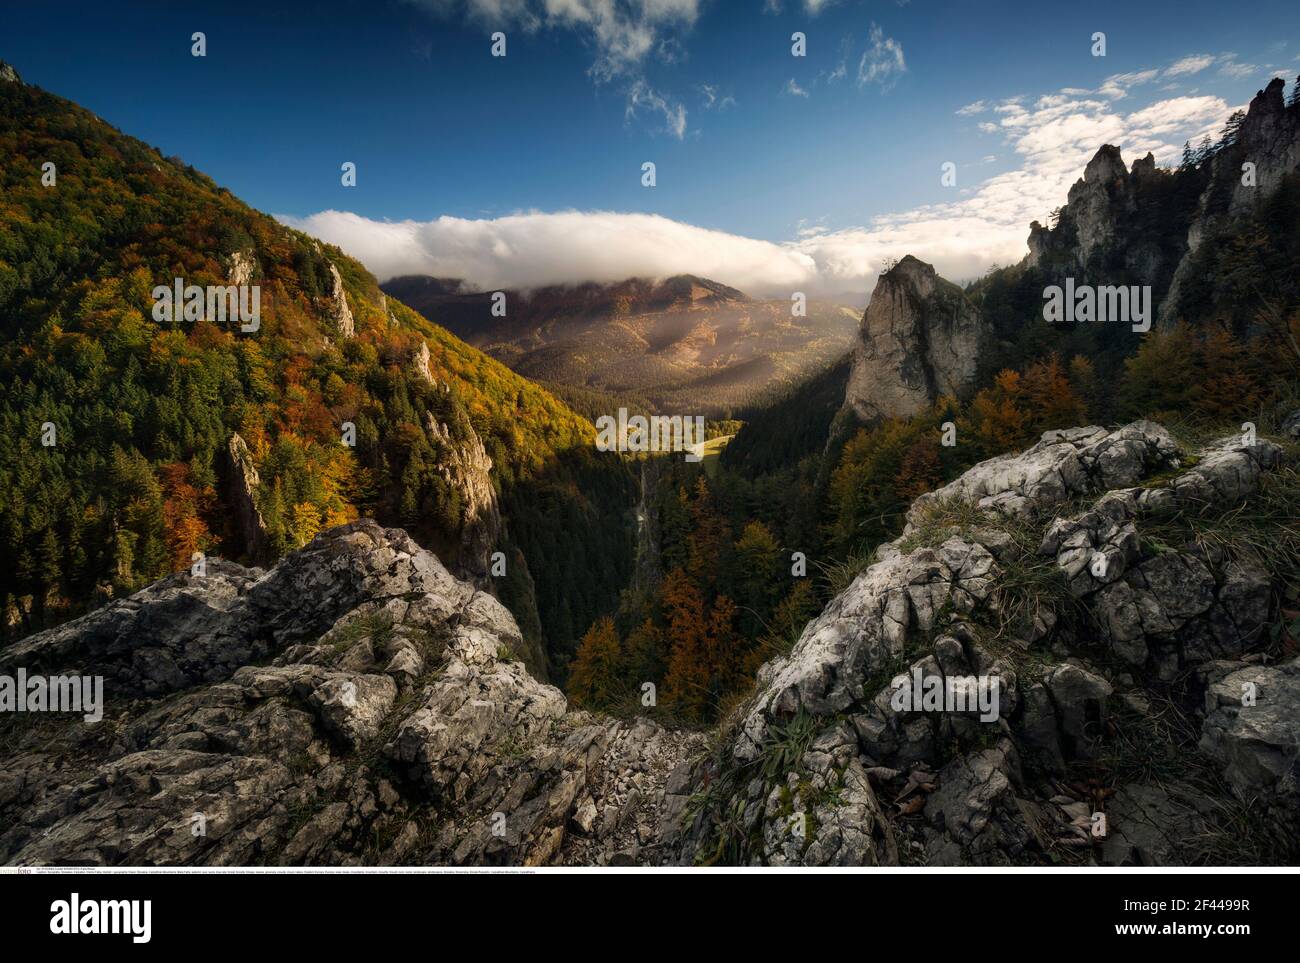 Geographie / Reisen, Slowakei, Karpaten, Mala Fatra, Herbst, Additional-Rights-Clearance-Info-Not-Available Stockfoto